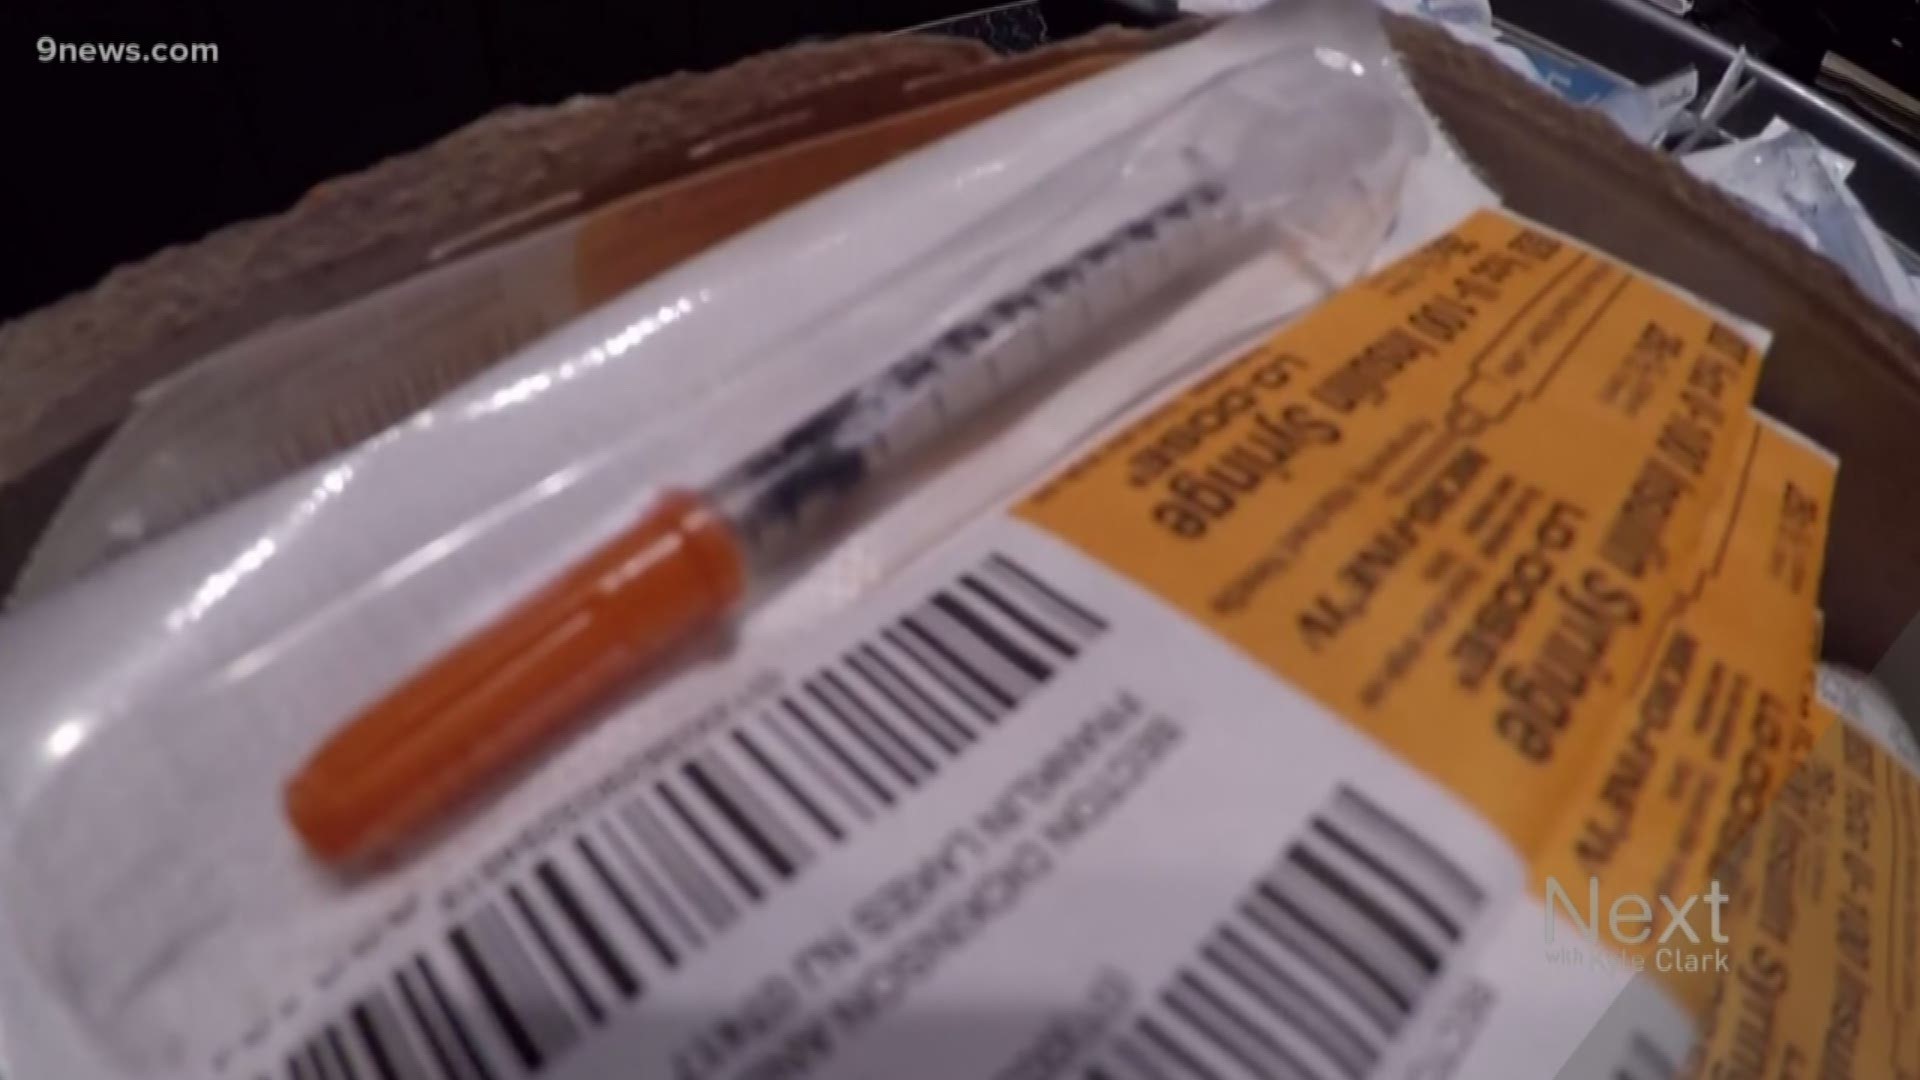 A federal judge in Philadelphia ruled a supervised injection site there would not violate federal drug laws. That decision gave a jolt to the local discussion.